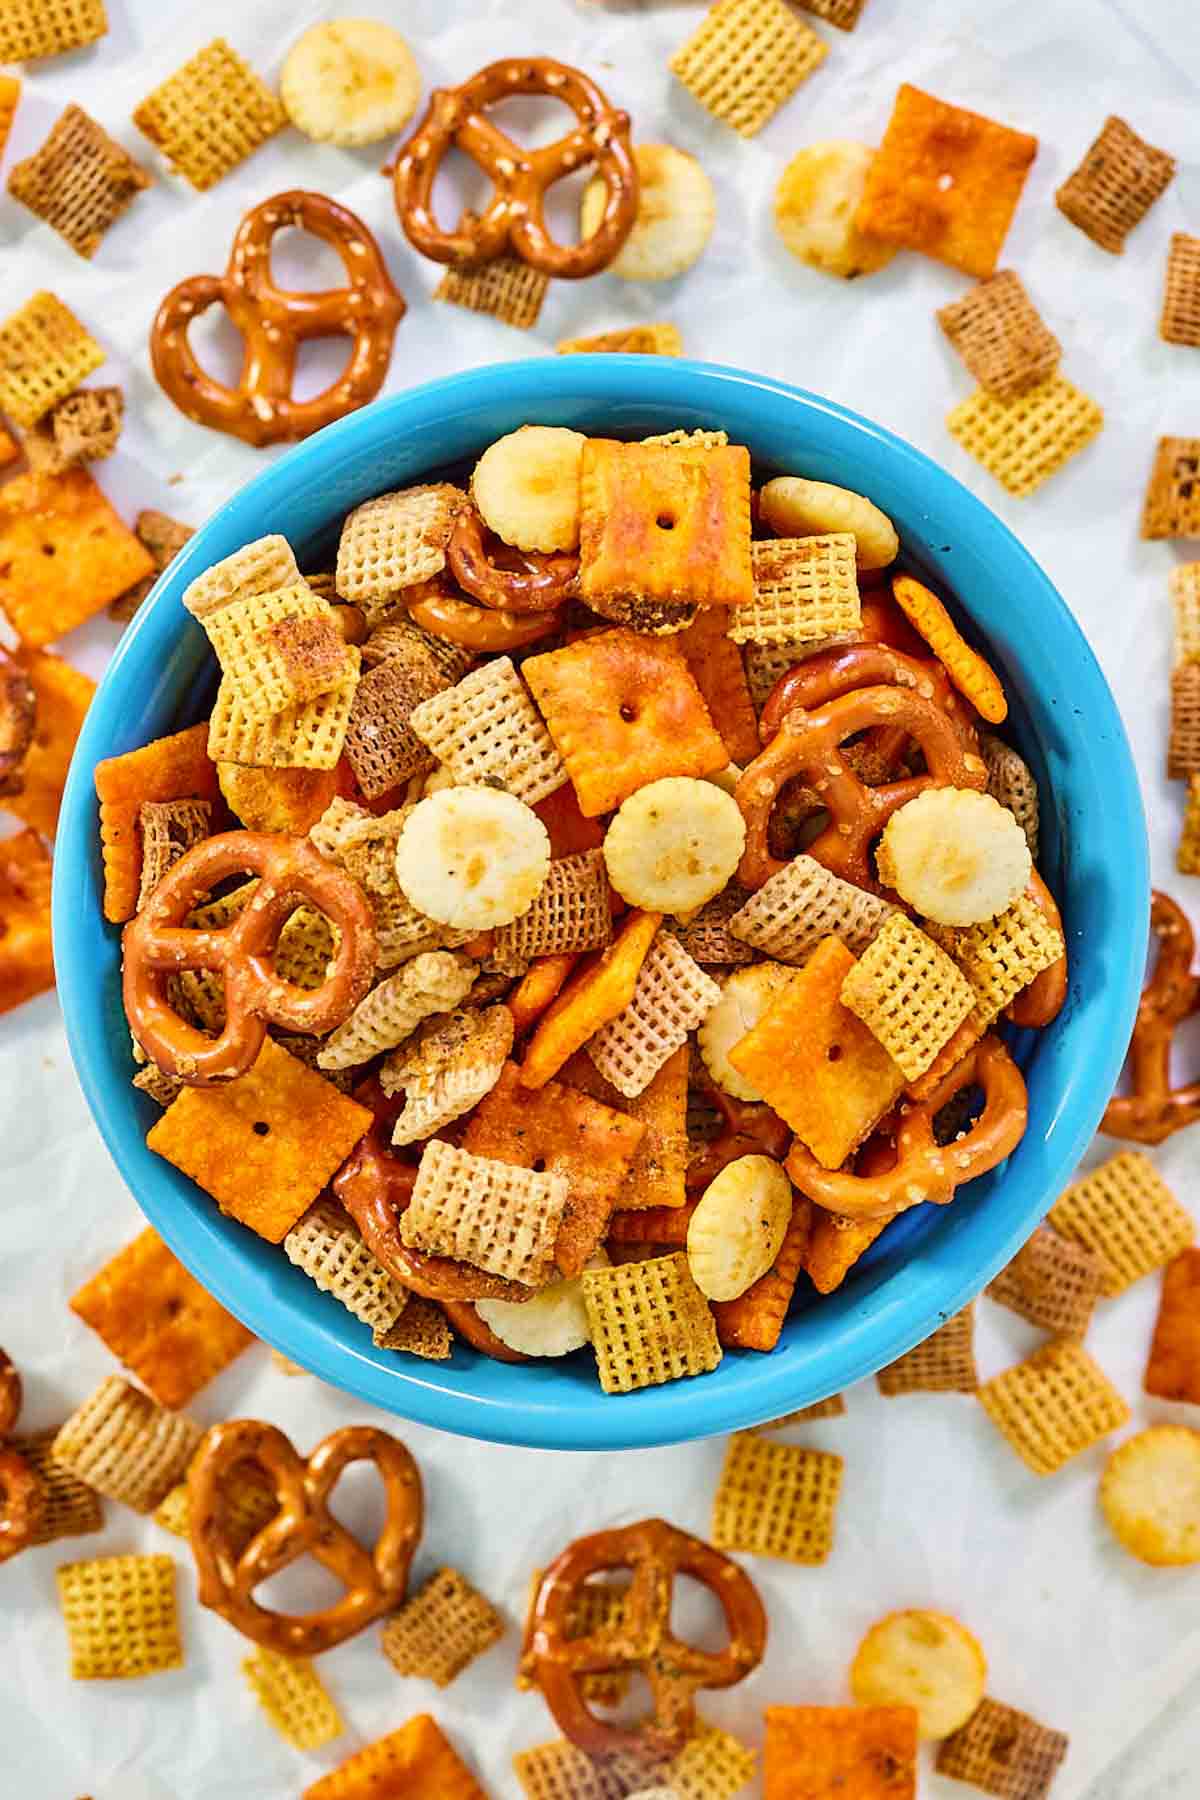 Homemade cheesy ranch chex mix in a bowl and scattered around it.